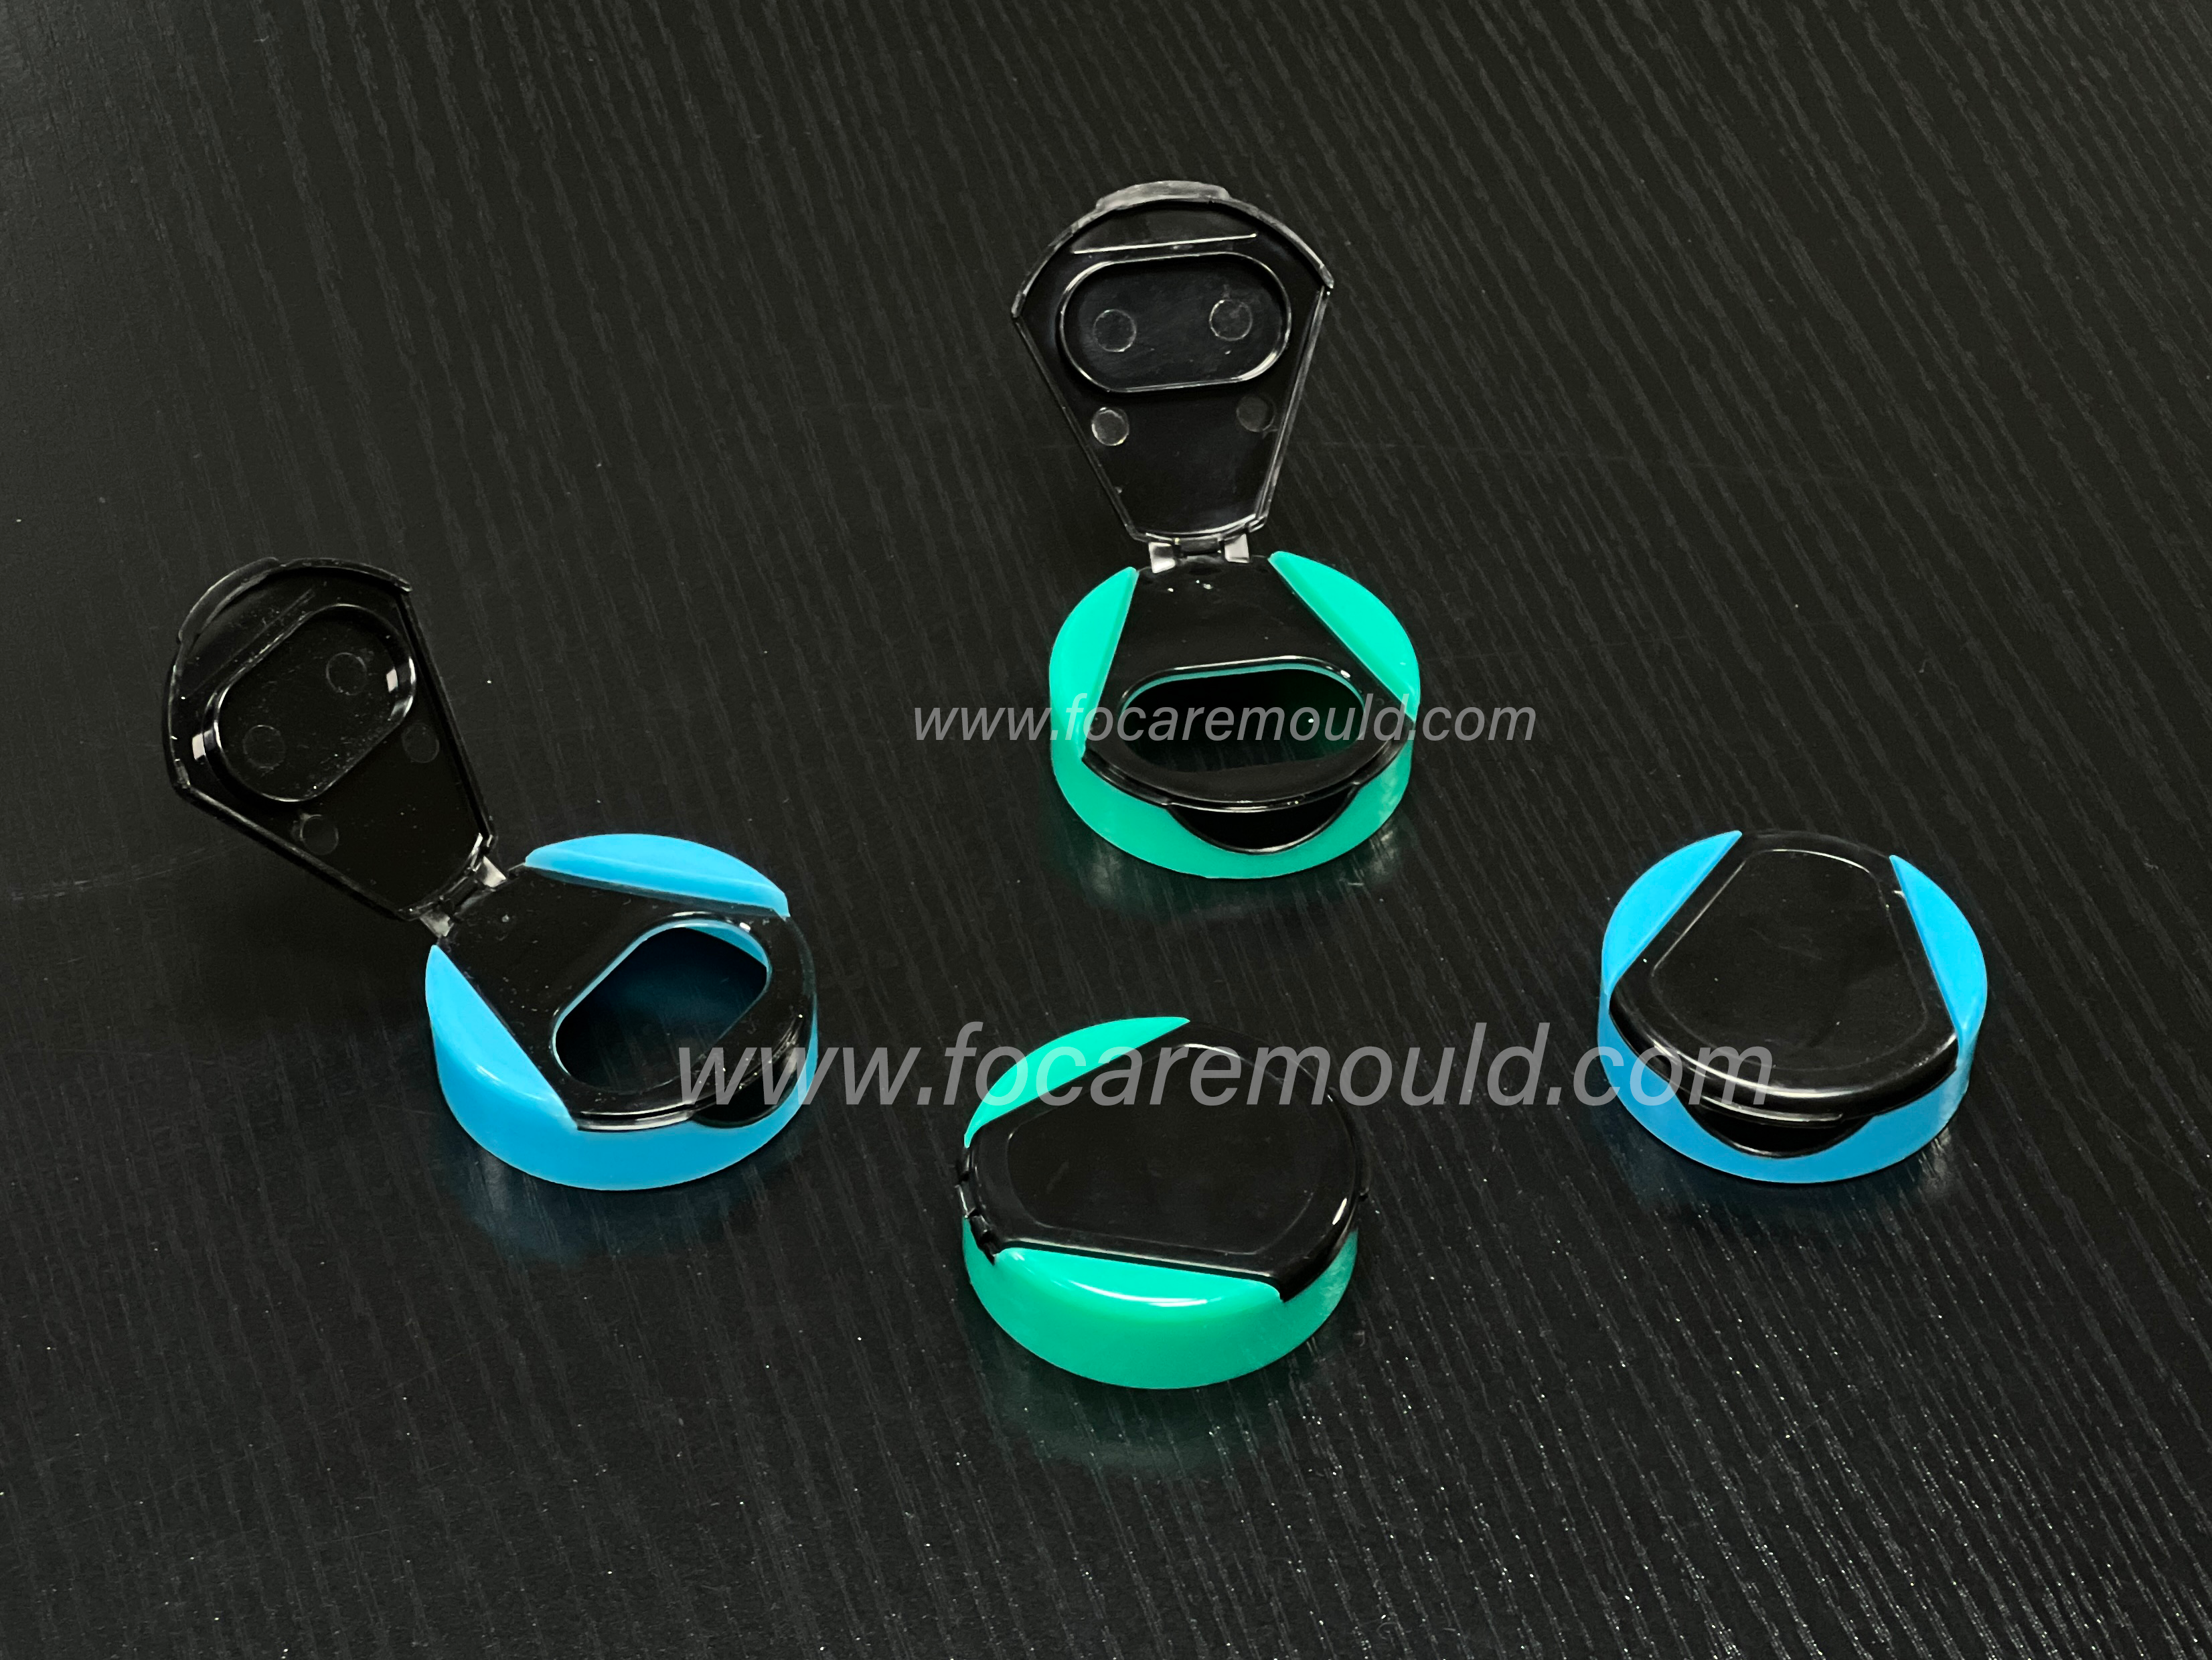 Two-color flip top cap mold with in-mold auto-closing